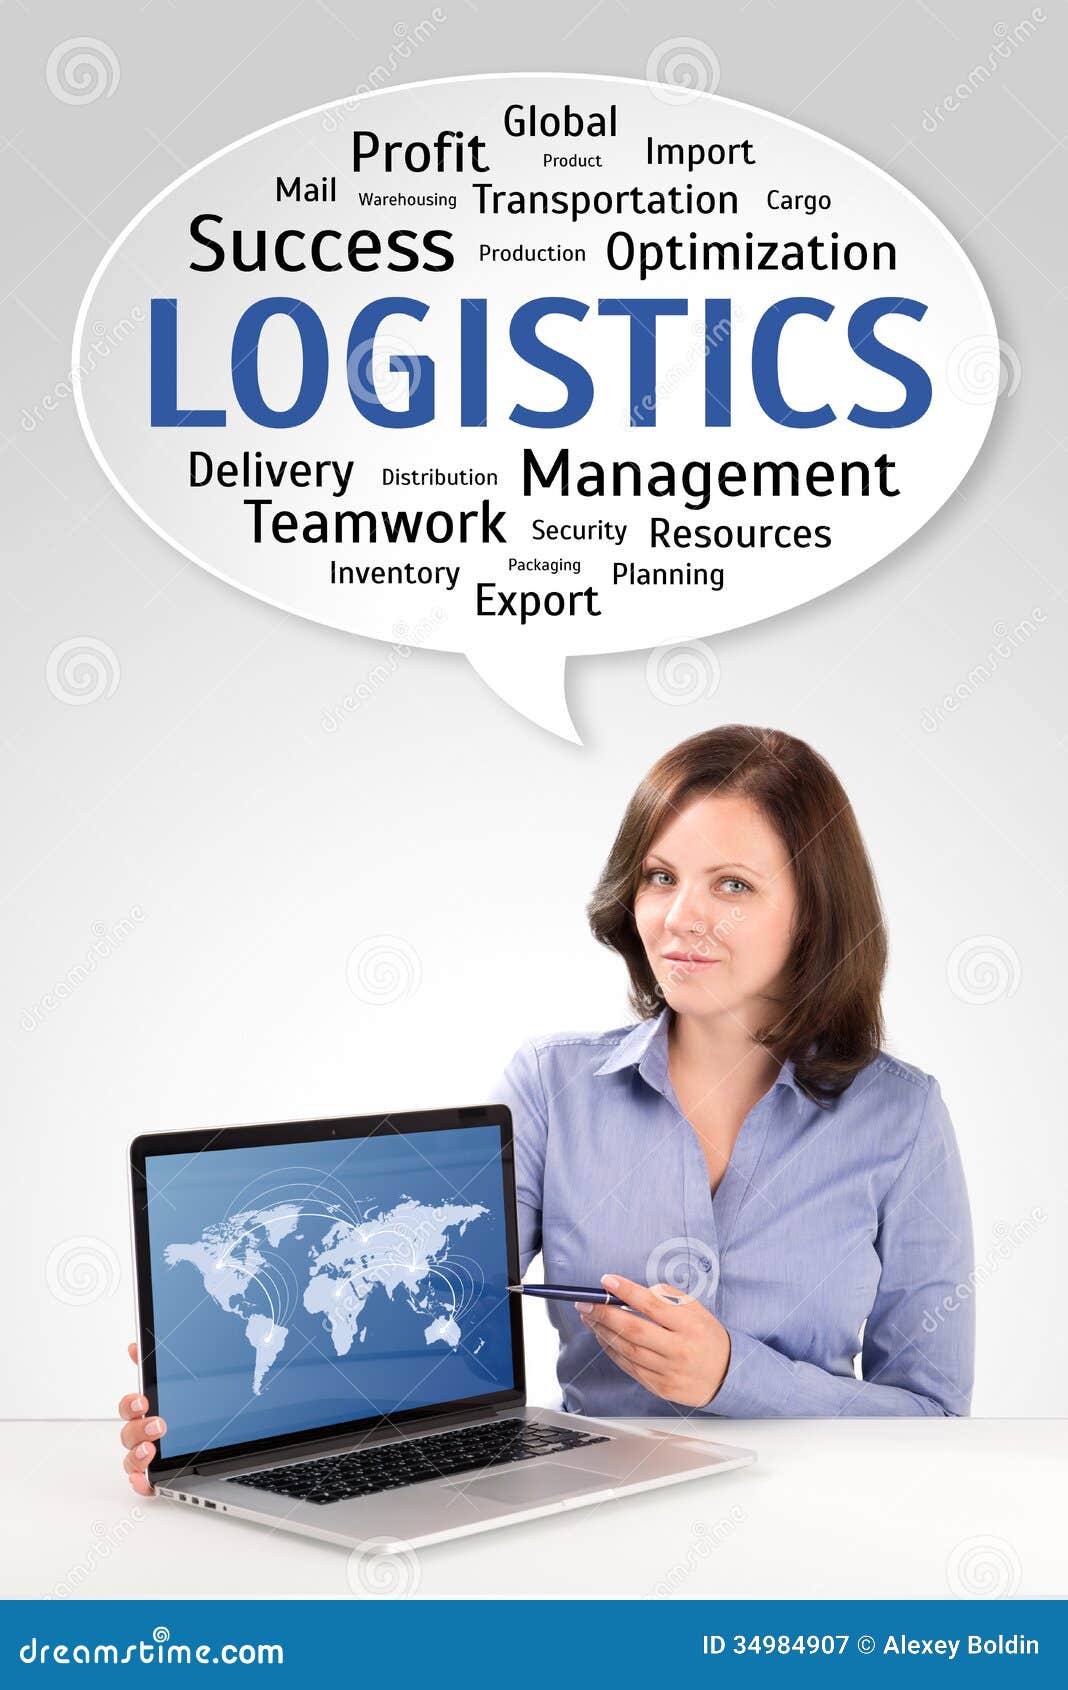 logistics manager is showing world map on a laptop screen